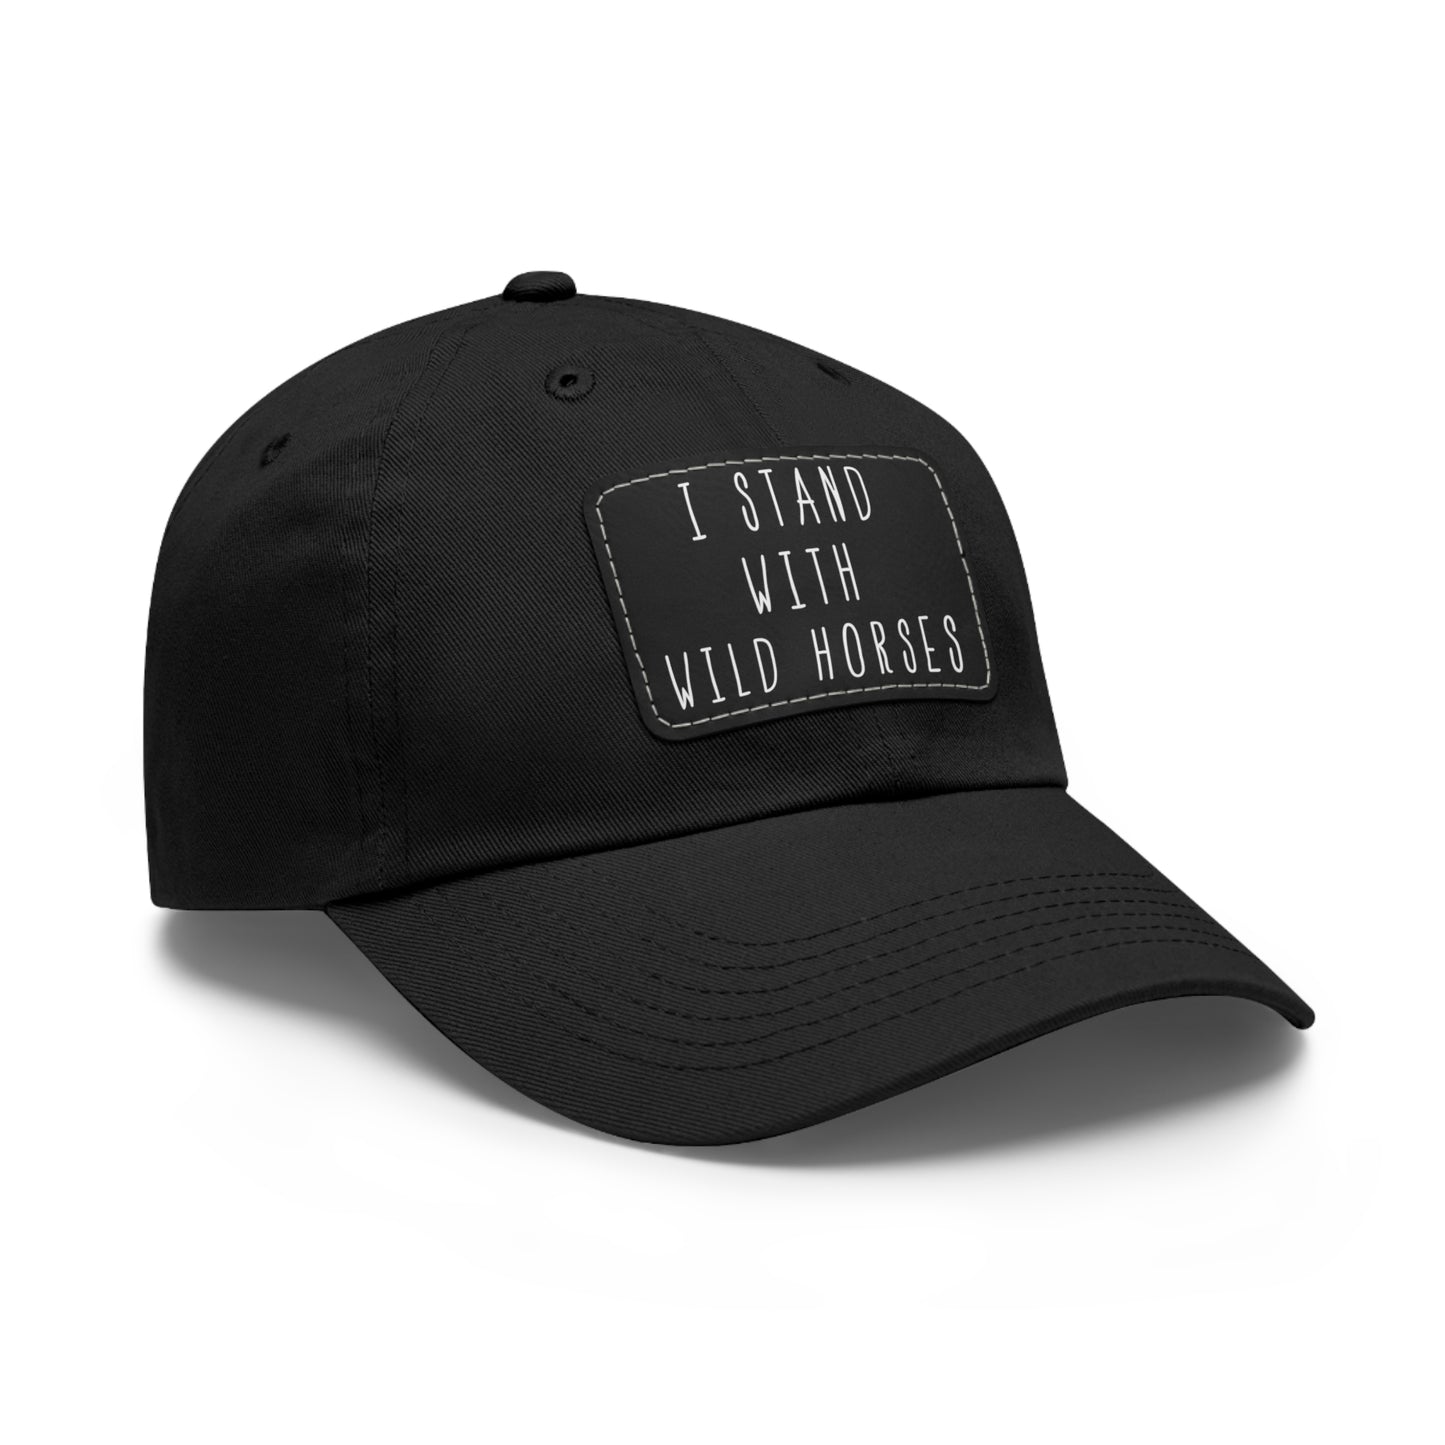 "I Stand..." Hat w/ Leather Patch